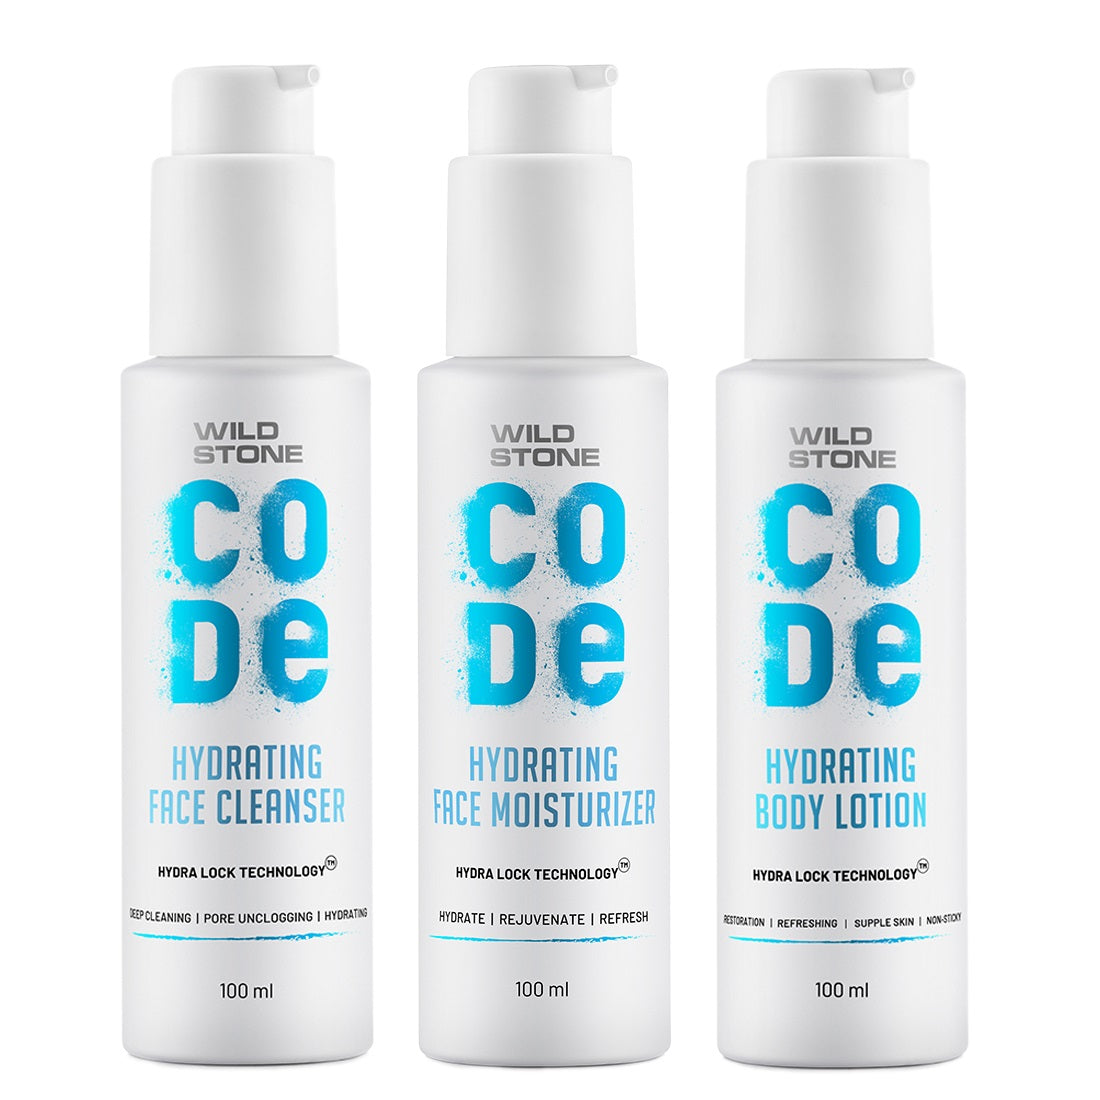 CODE face cleanser, Face moisturiser and body lotion